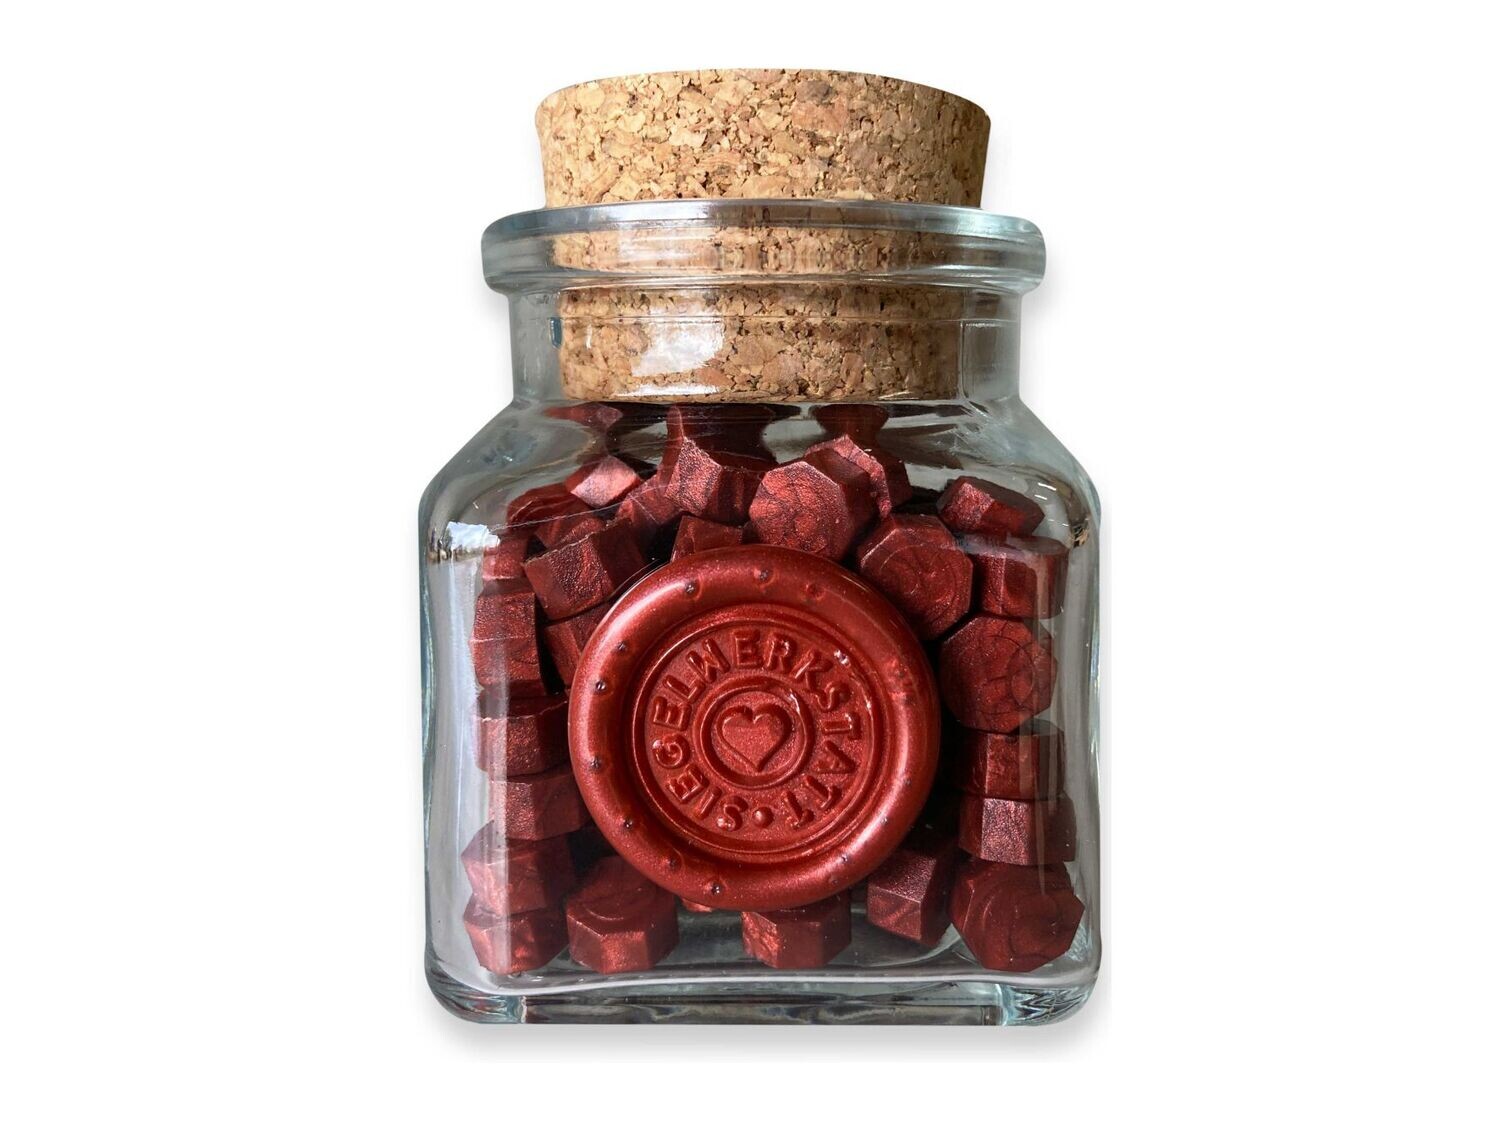 Sealing Wax Beads in Glass Bottle - Red-copper